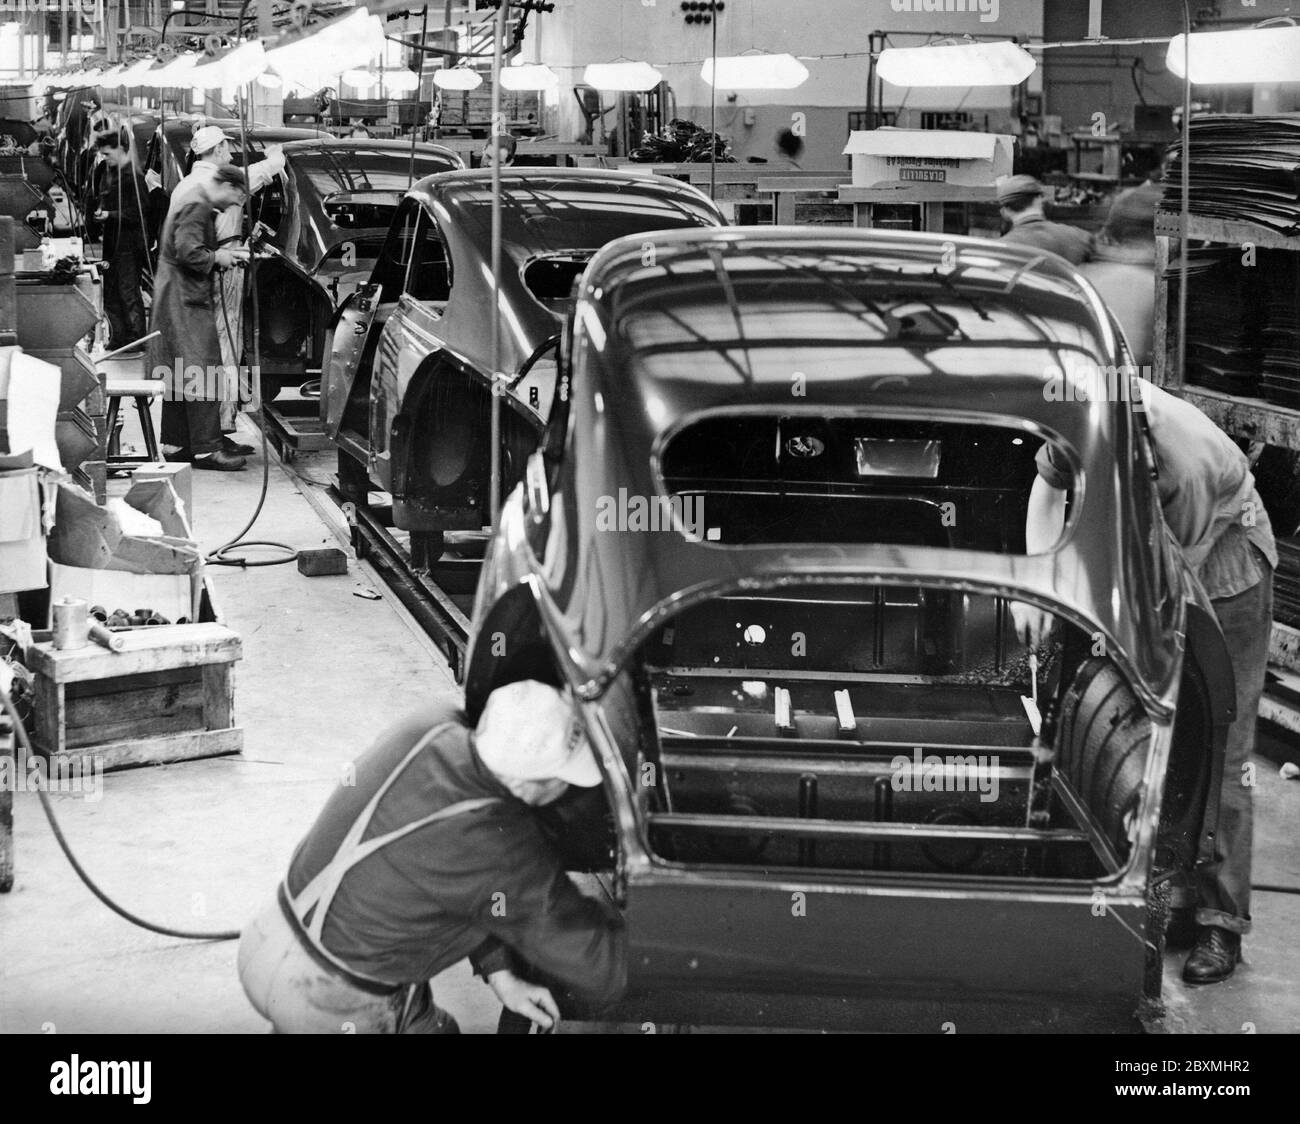 Car manufacturing in the 1950s. The Saab car factory in Trollhättan Sweden with it's line of production. Workers on an Assembly line add parts as the car bodies move from workstation to workstation until the final assembly is produced. The model is Saab 93. A three cylinder engine two-stroke engine of 33 hp. Stock Photo